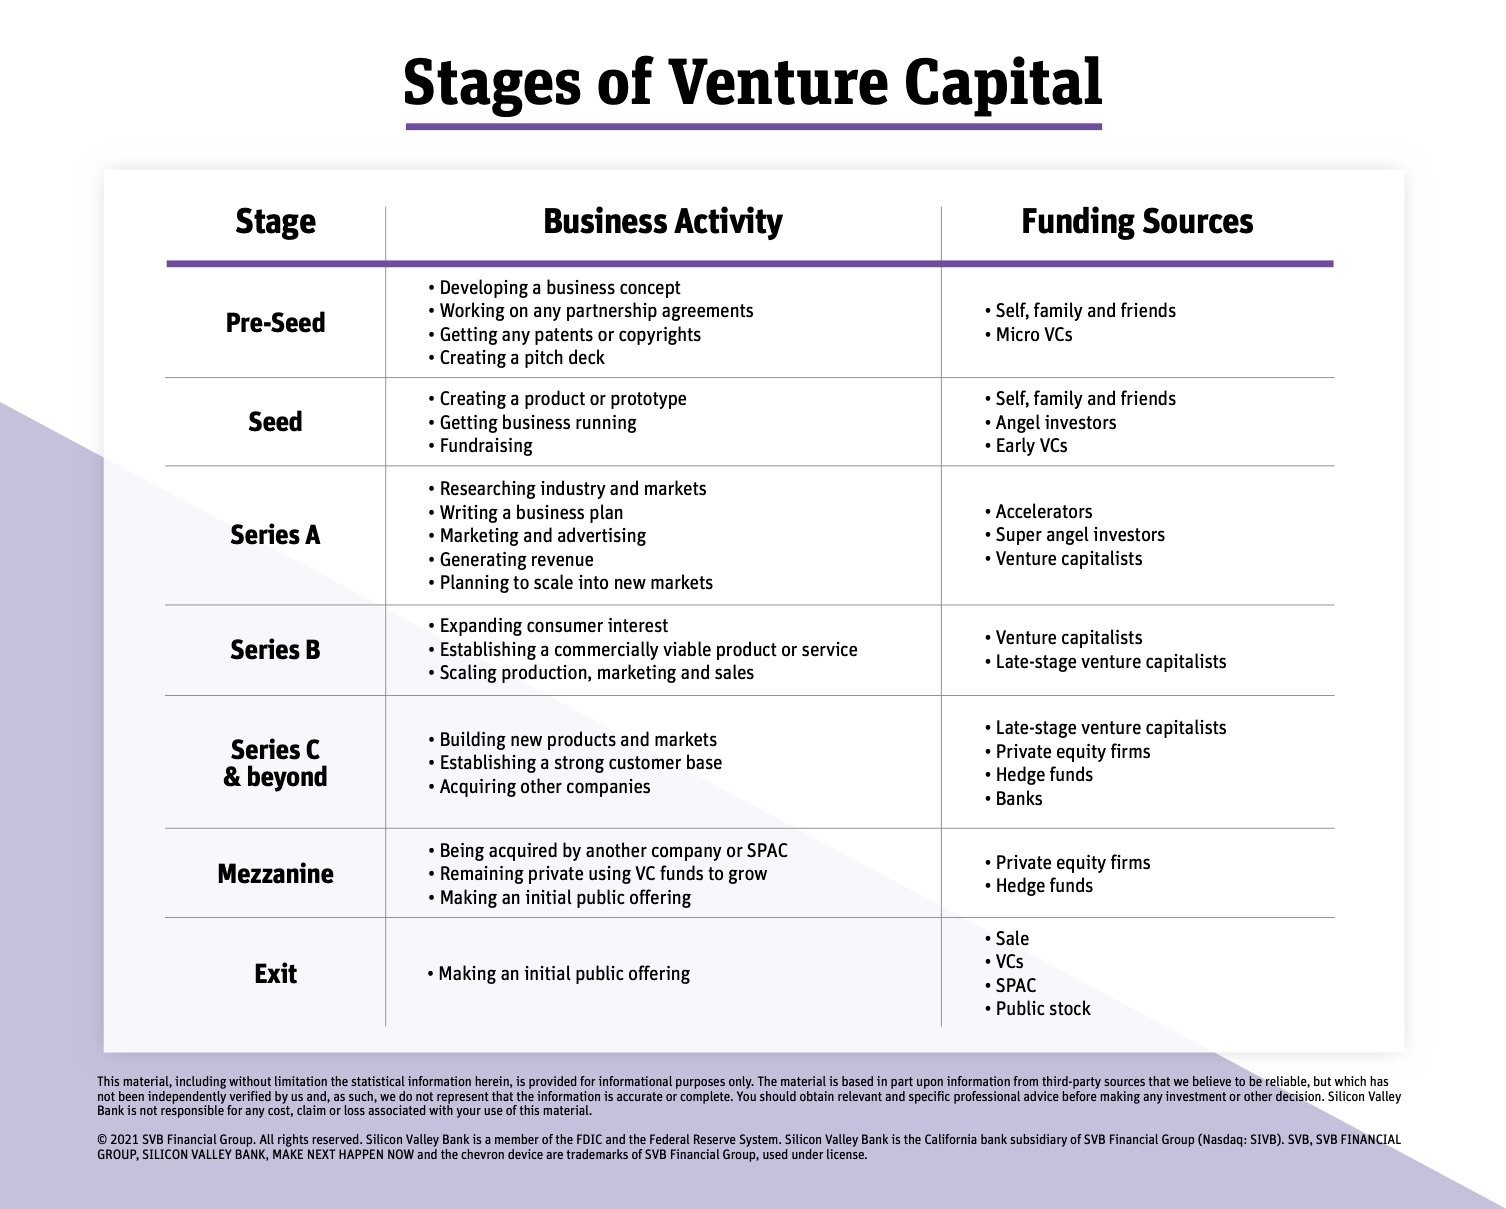 Stages of Venture Capital